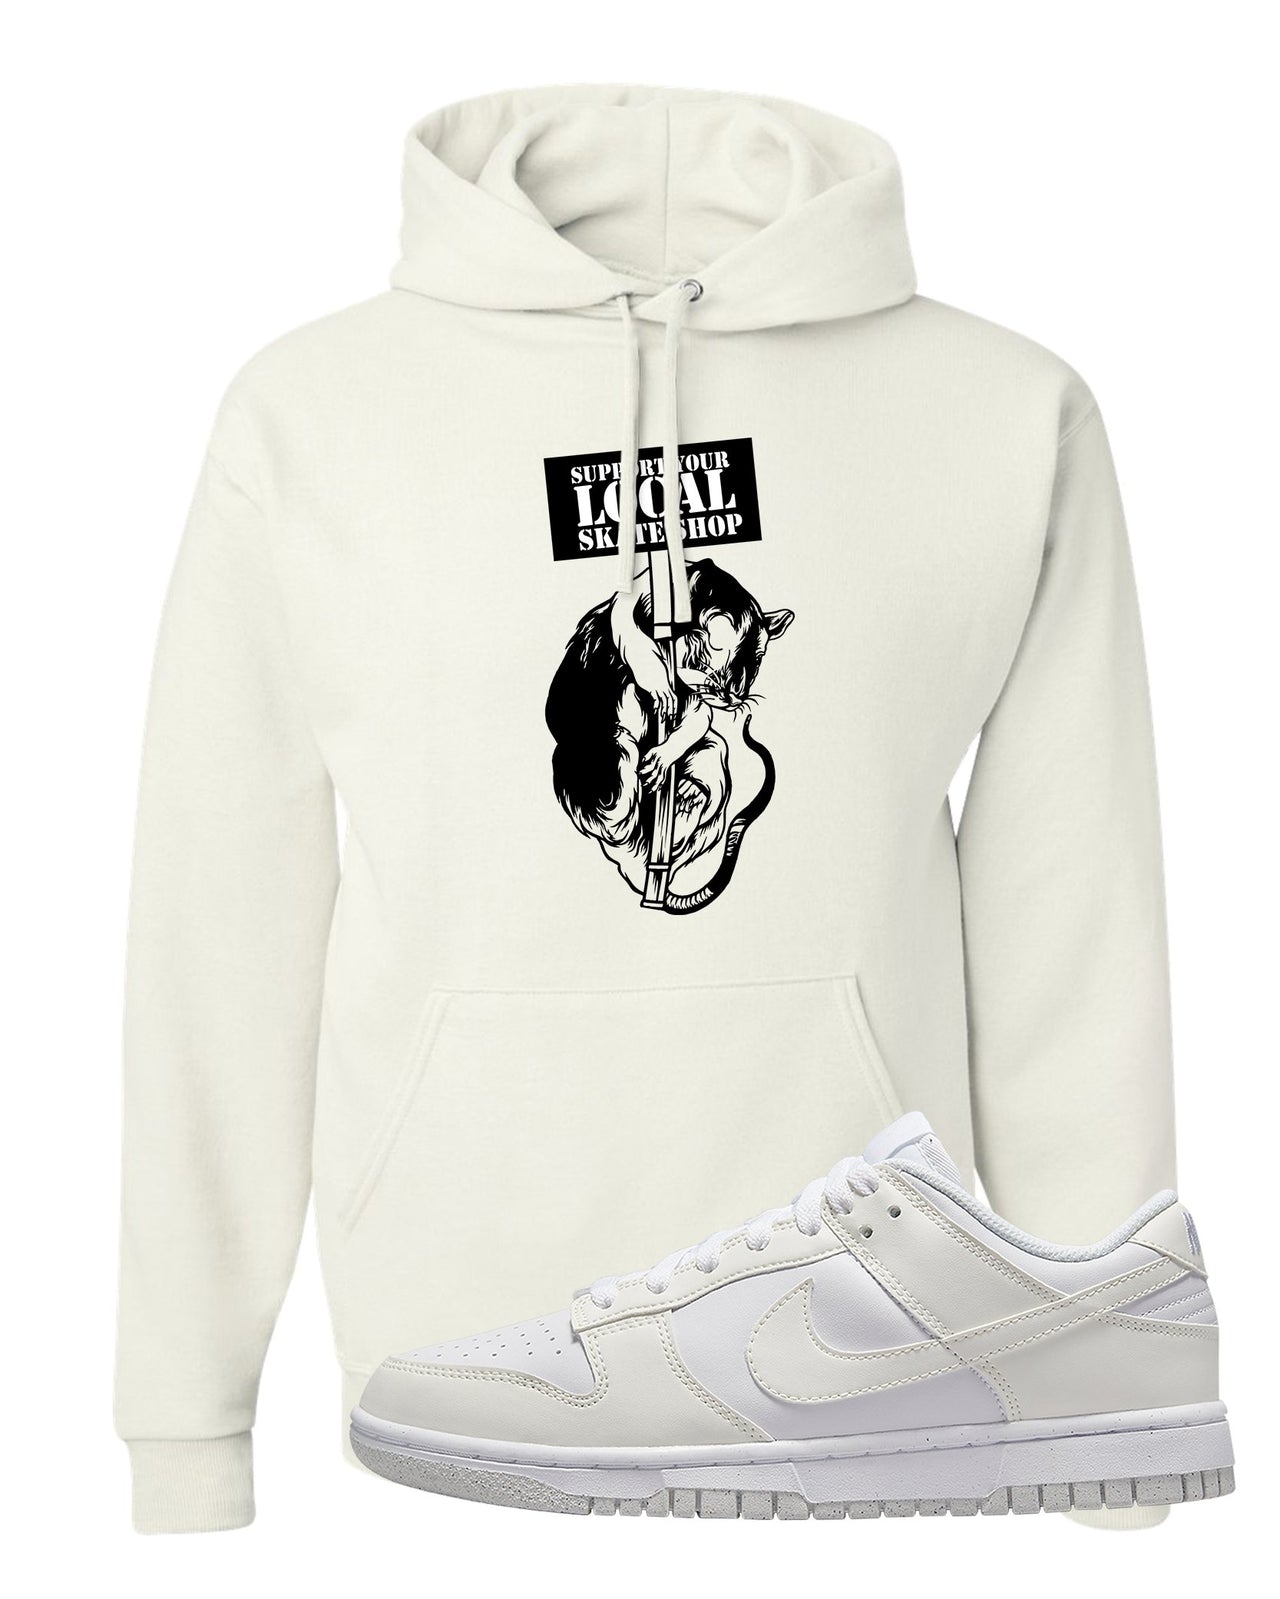 Next Nature White Low Dunks Hoodie | Support Your Local Skate Shop, White